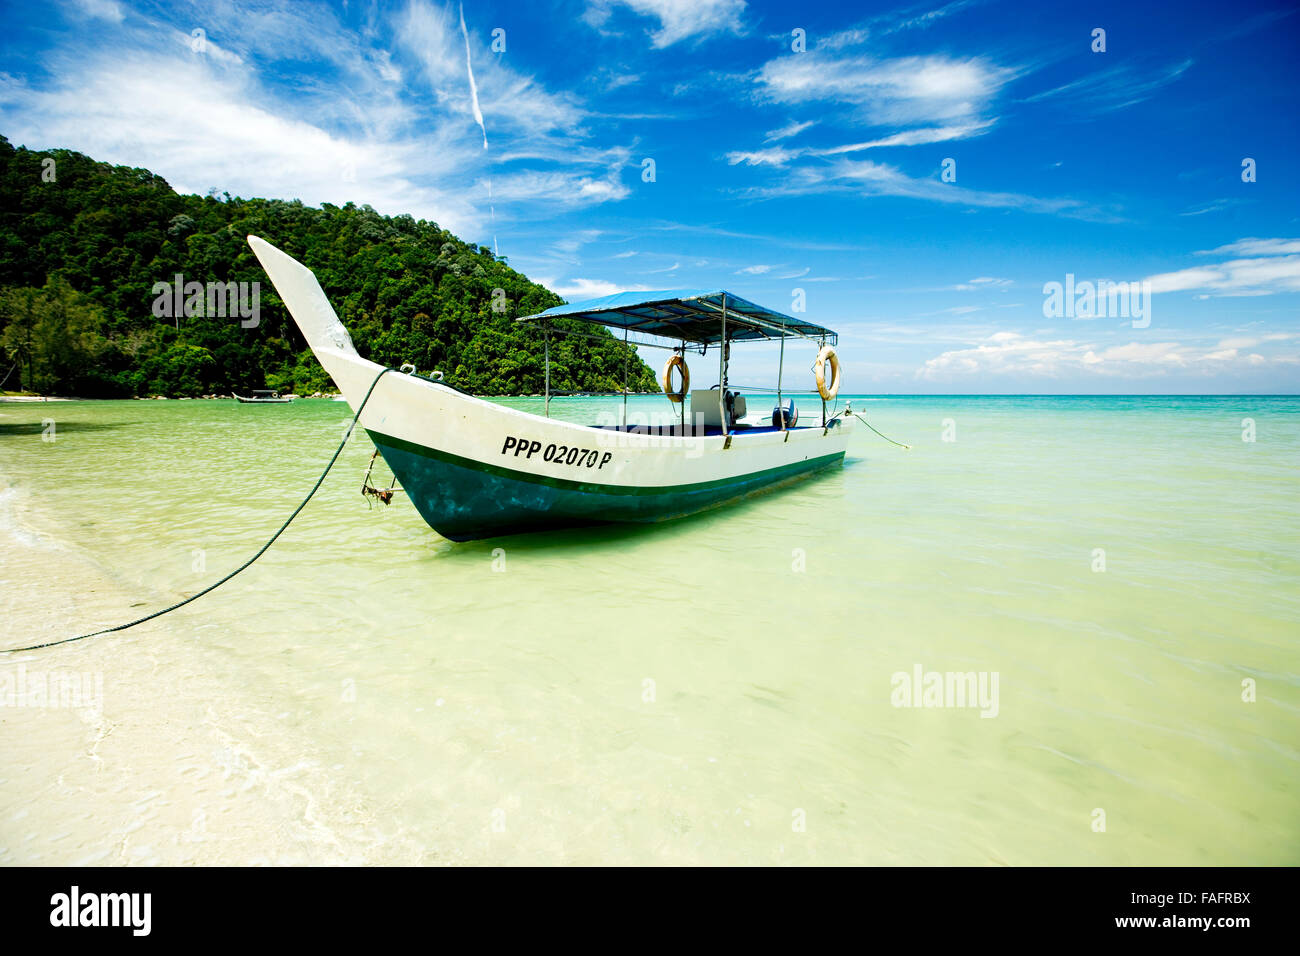 Long boat moored on a beach in thailand Stock Photo